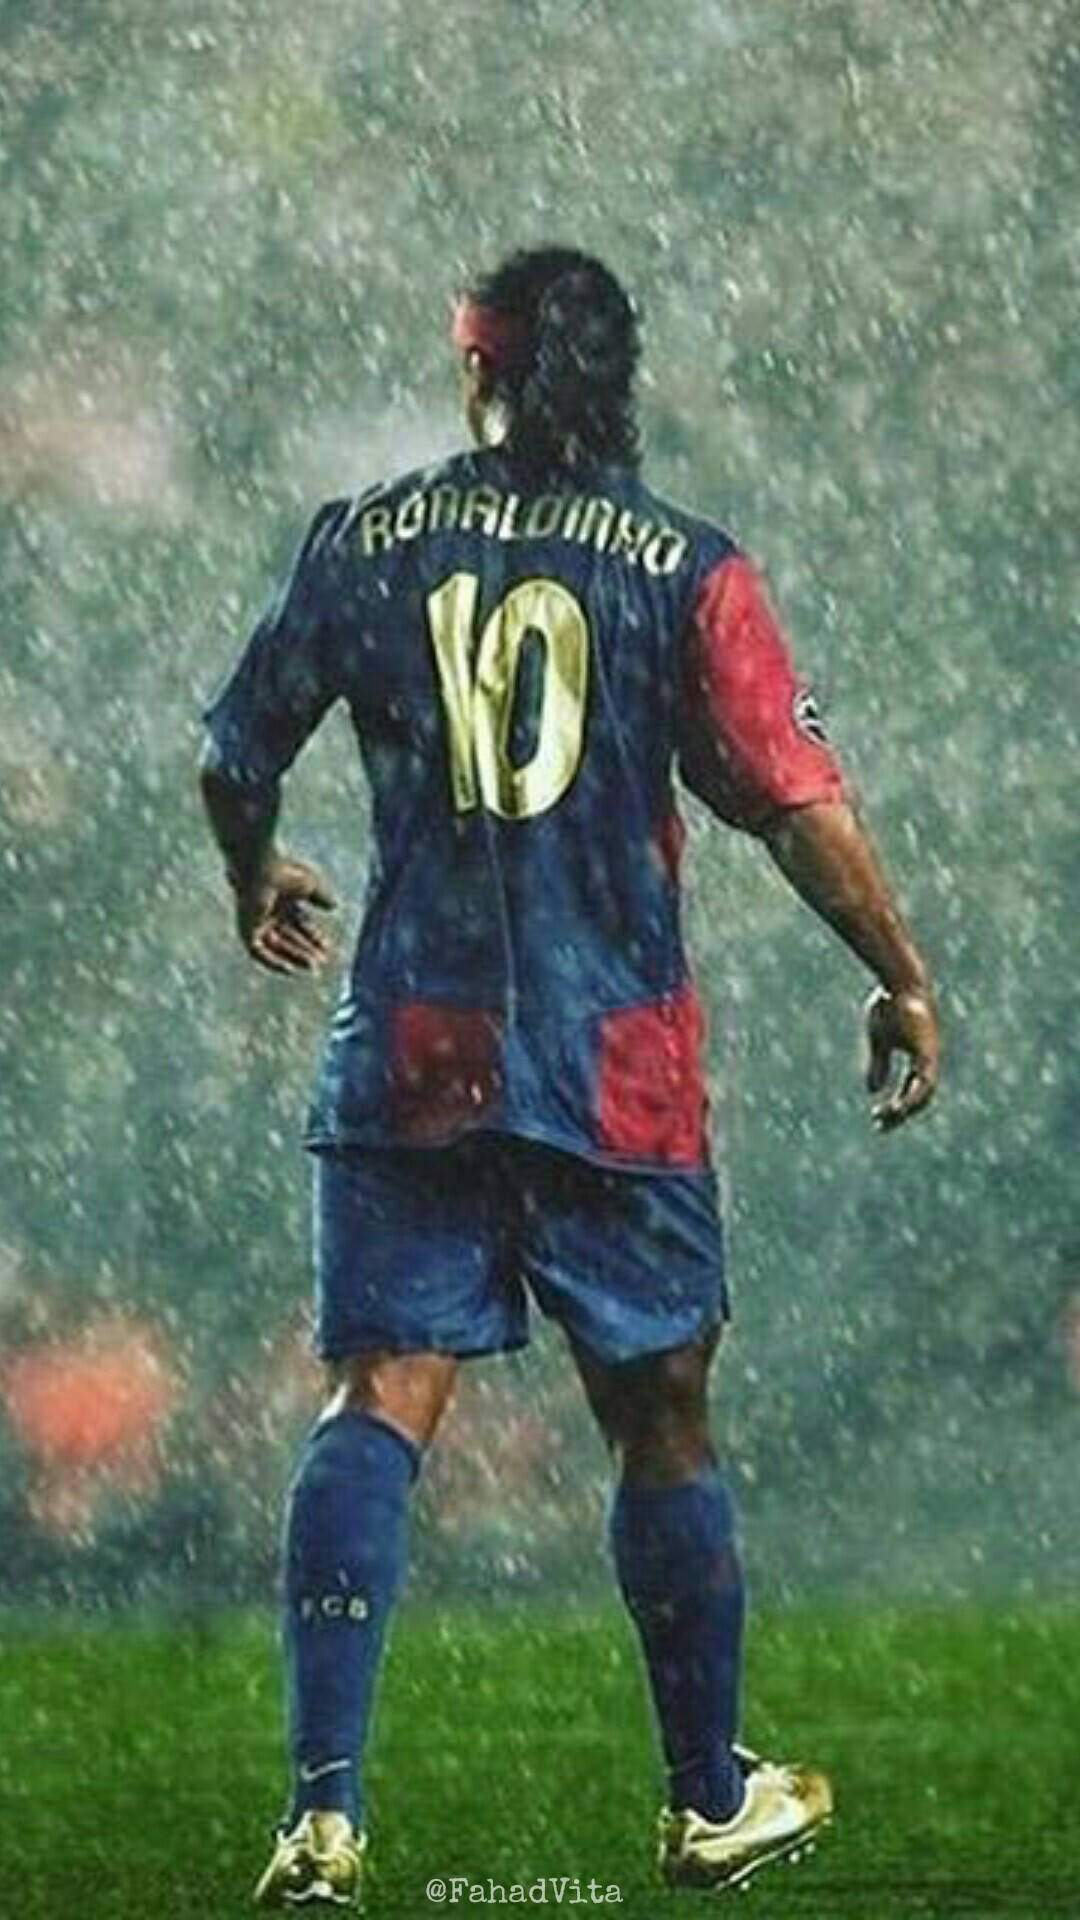 Ronaldinho In Action During The Football Match Wallpaper